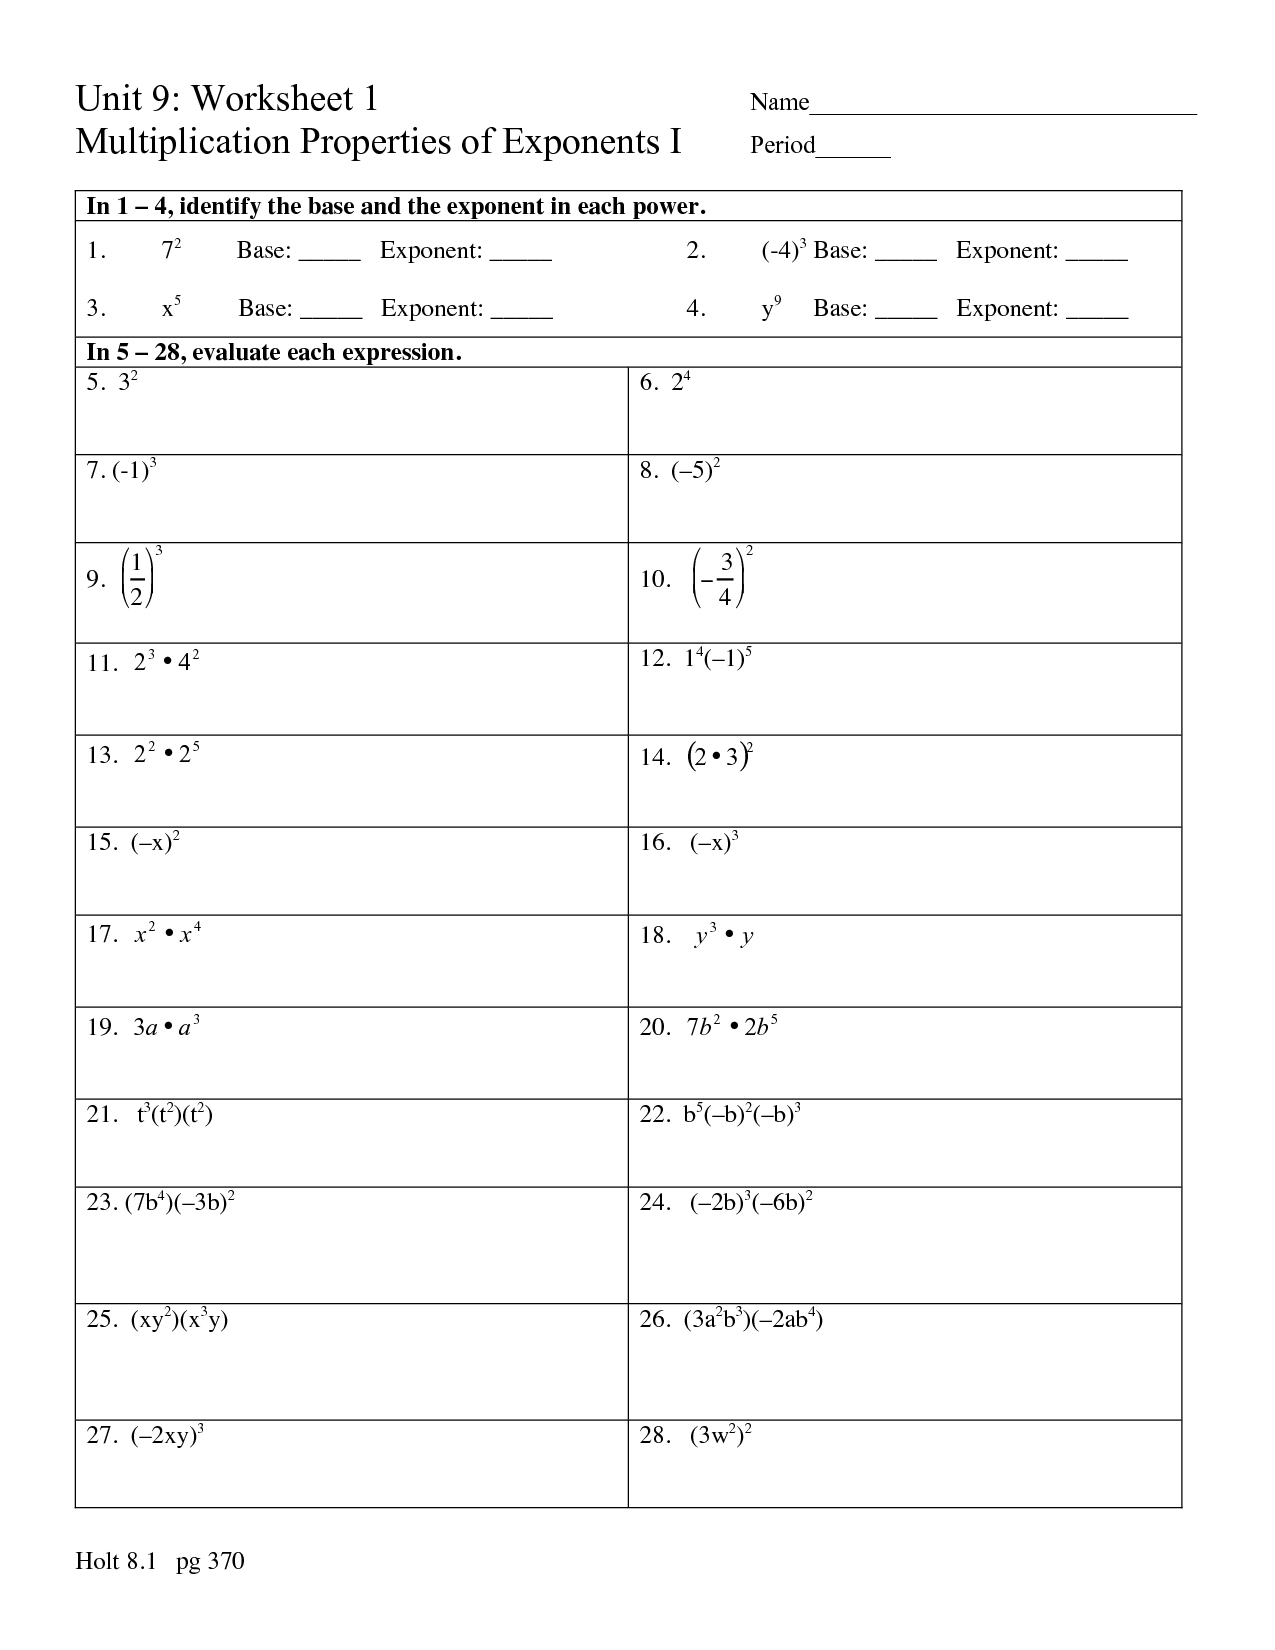  Multiplication Properties Of Exponents Worksheet Answers 7 1 Practice 8 3 multiplication 